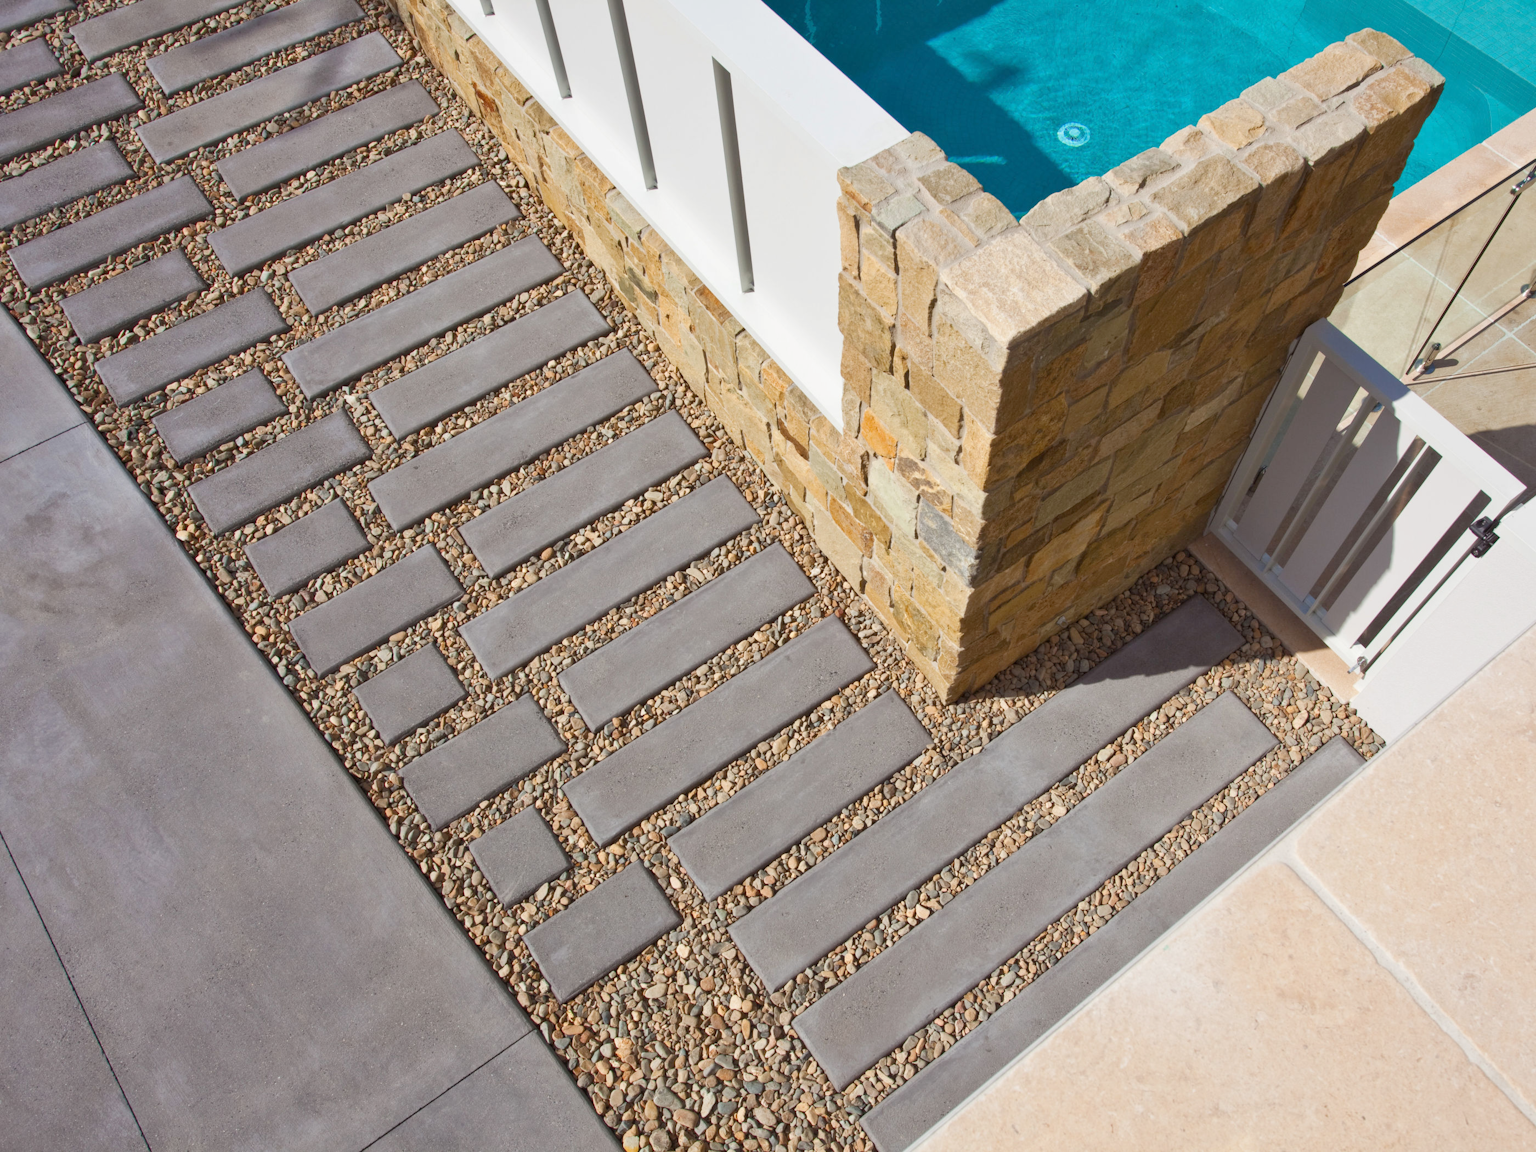 Basalt concrete pavers and stepping stones of driveway with Clancy random ashlar walling on pool fence. La Roche limestone around the pool.